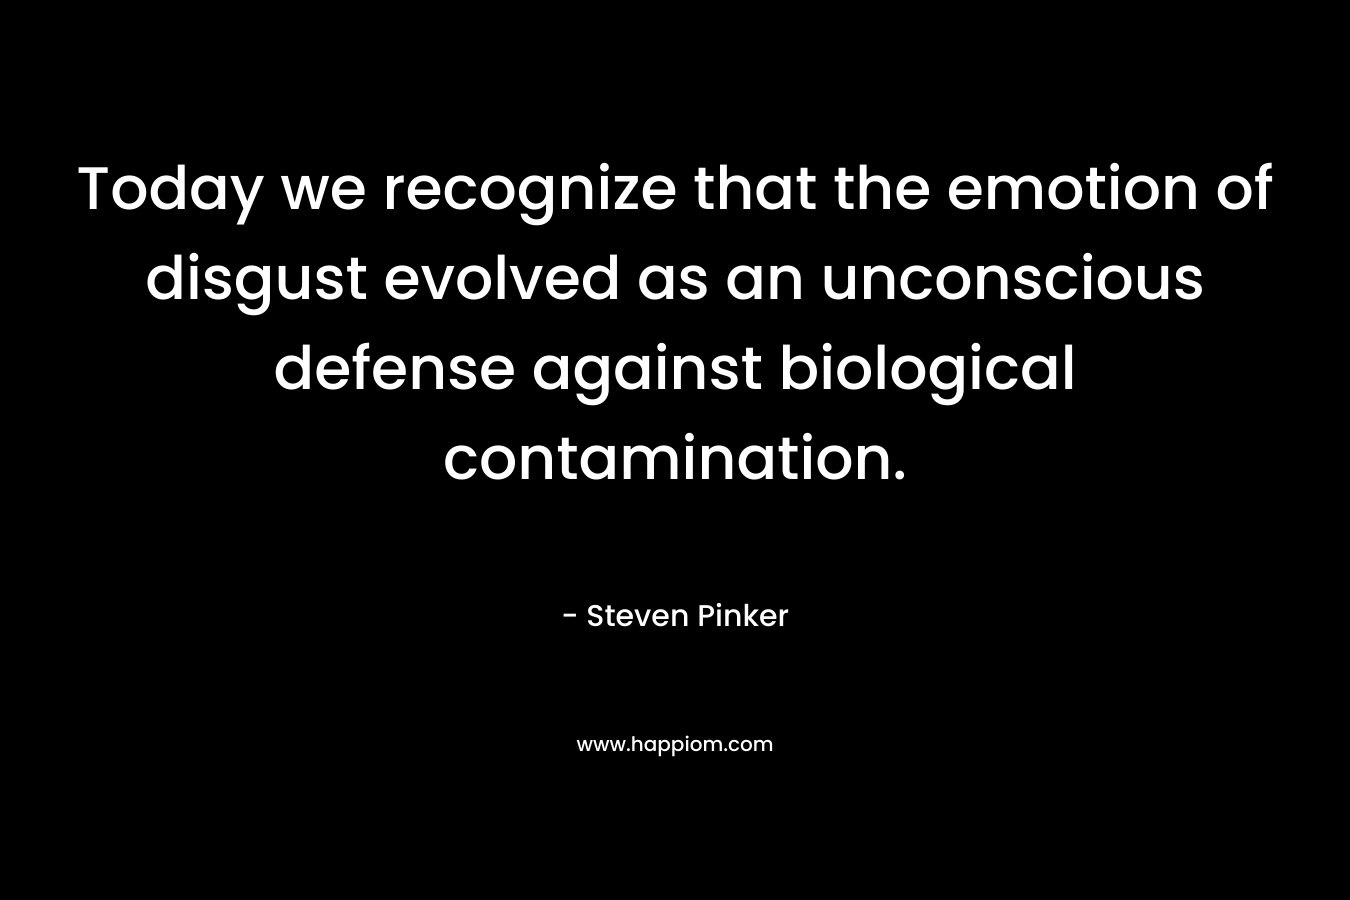 Today we recognize that the emotion of disgust evolved as an unconscious defense against biological contamination. – Steven Pinker